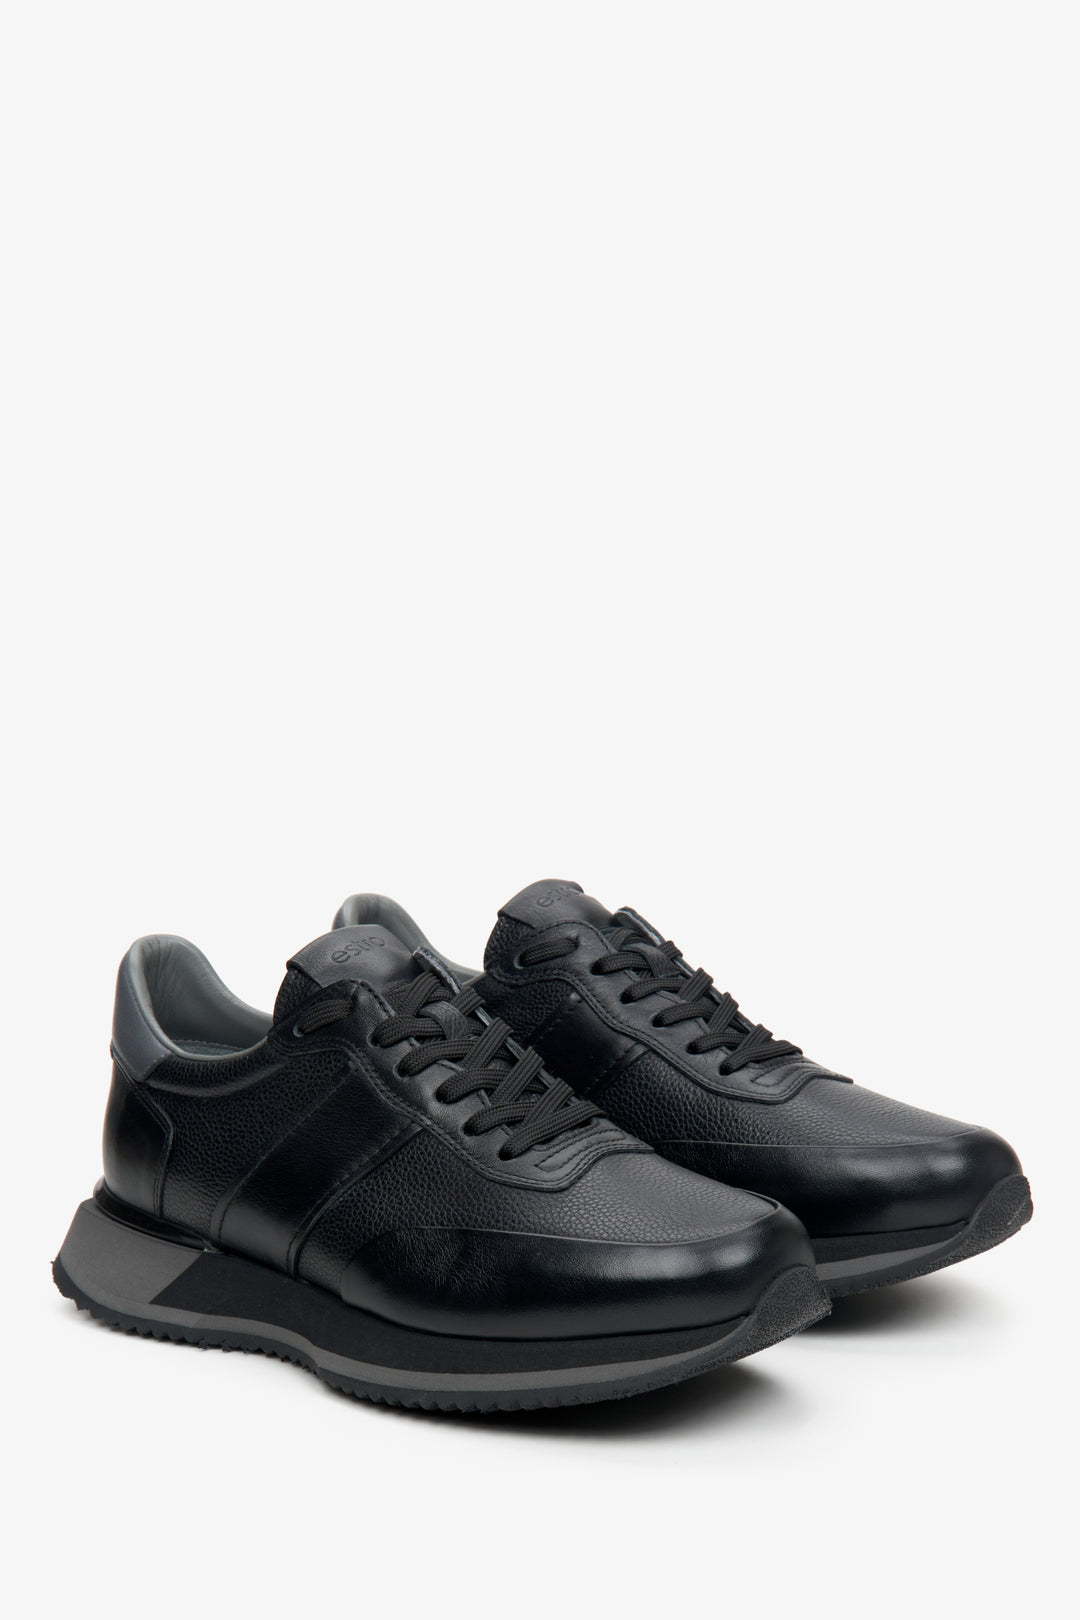 Men's athletic sneakers in black with lacing.